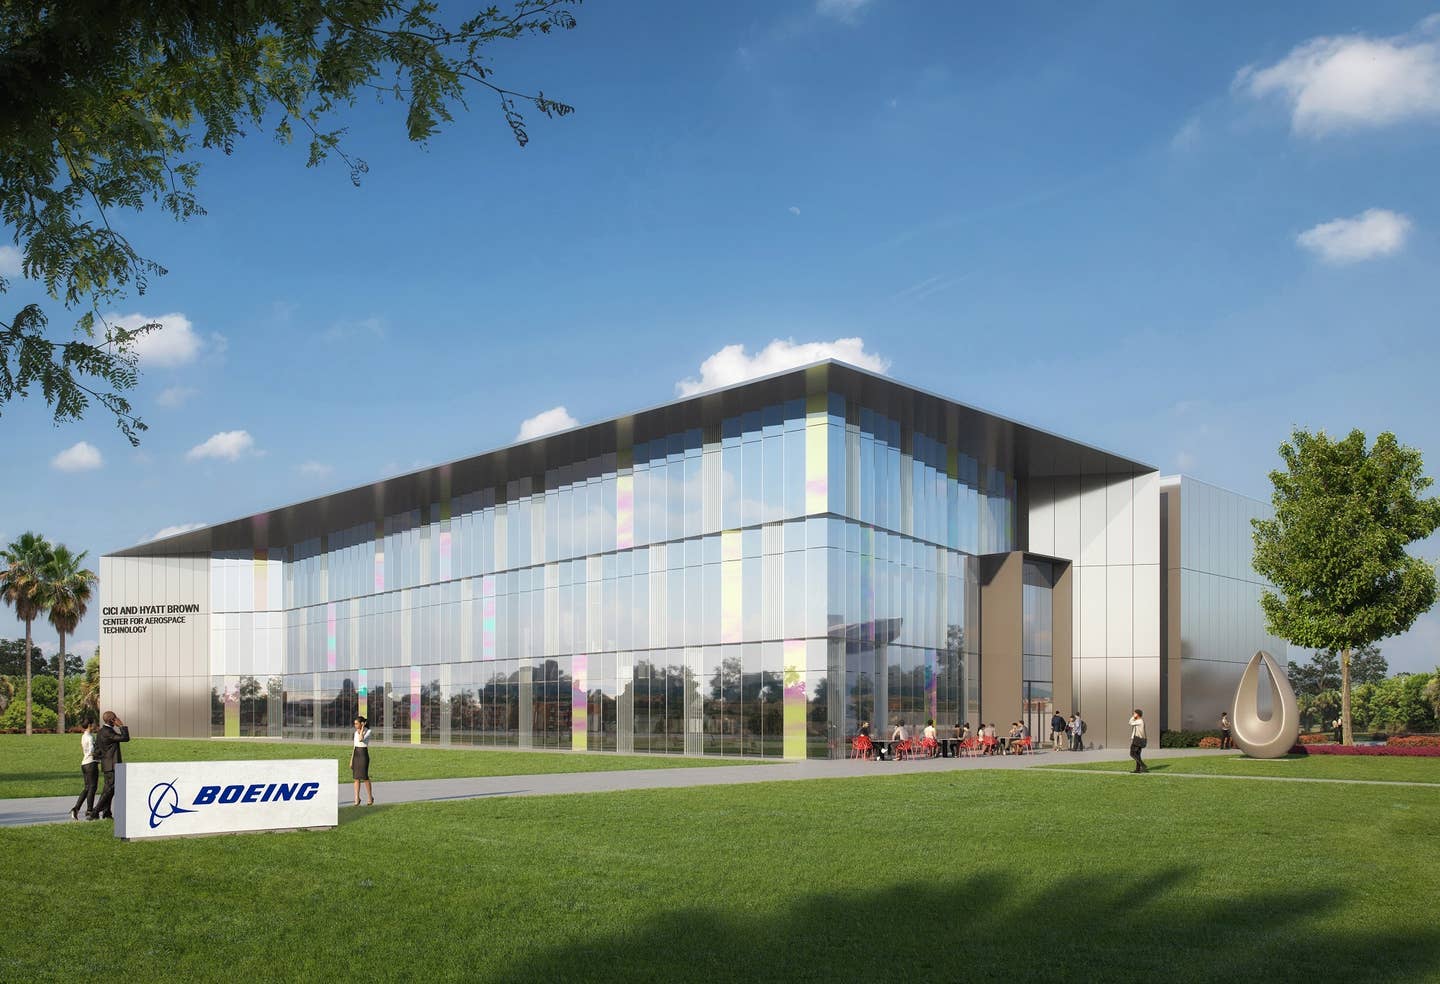 Boeing to Open New Engineering Facility at Embry-Riddle